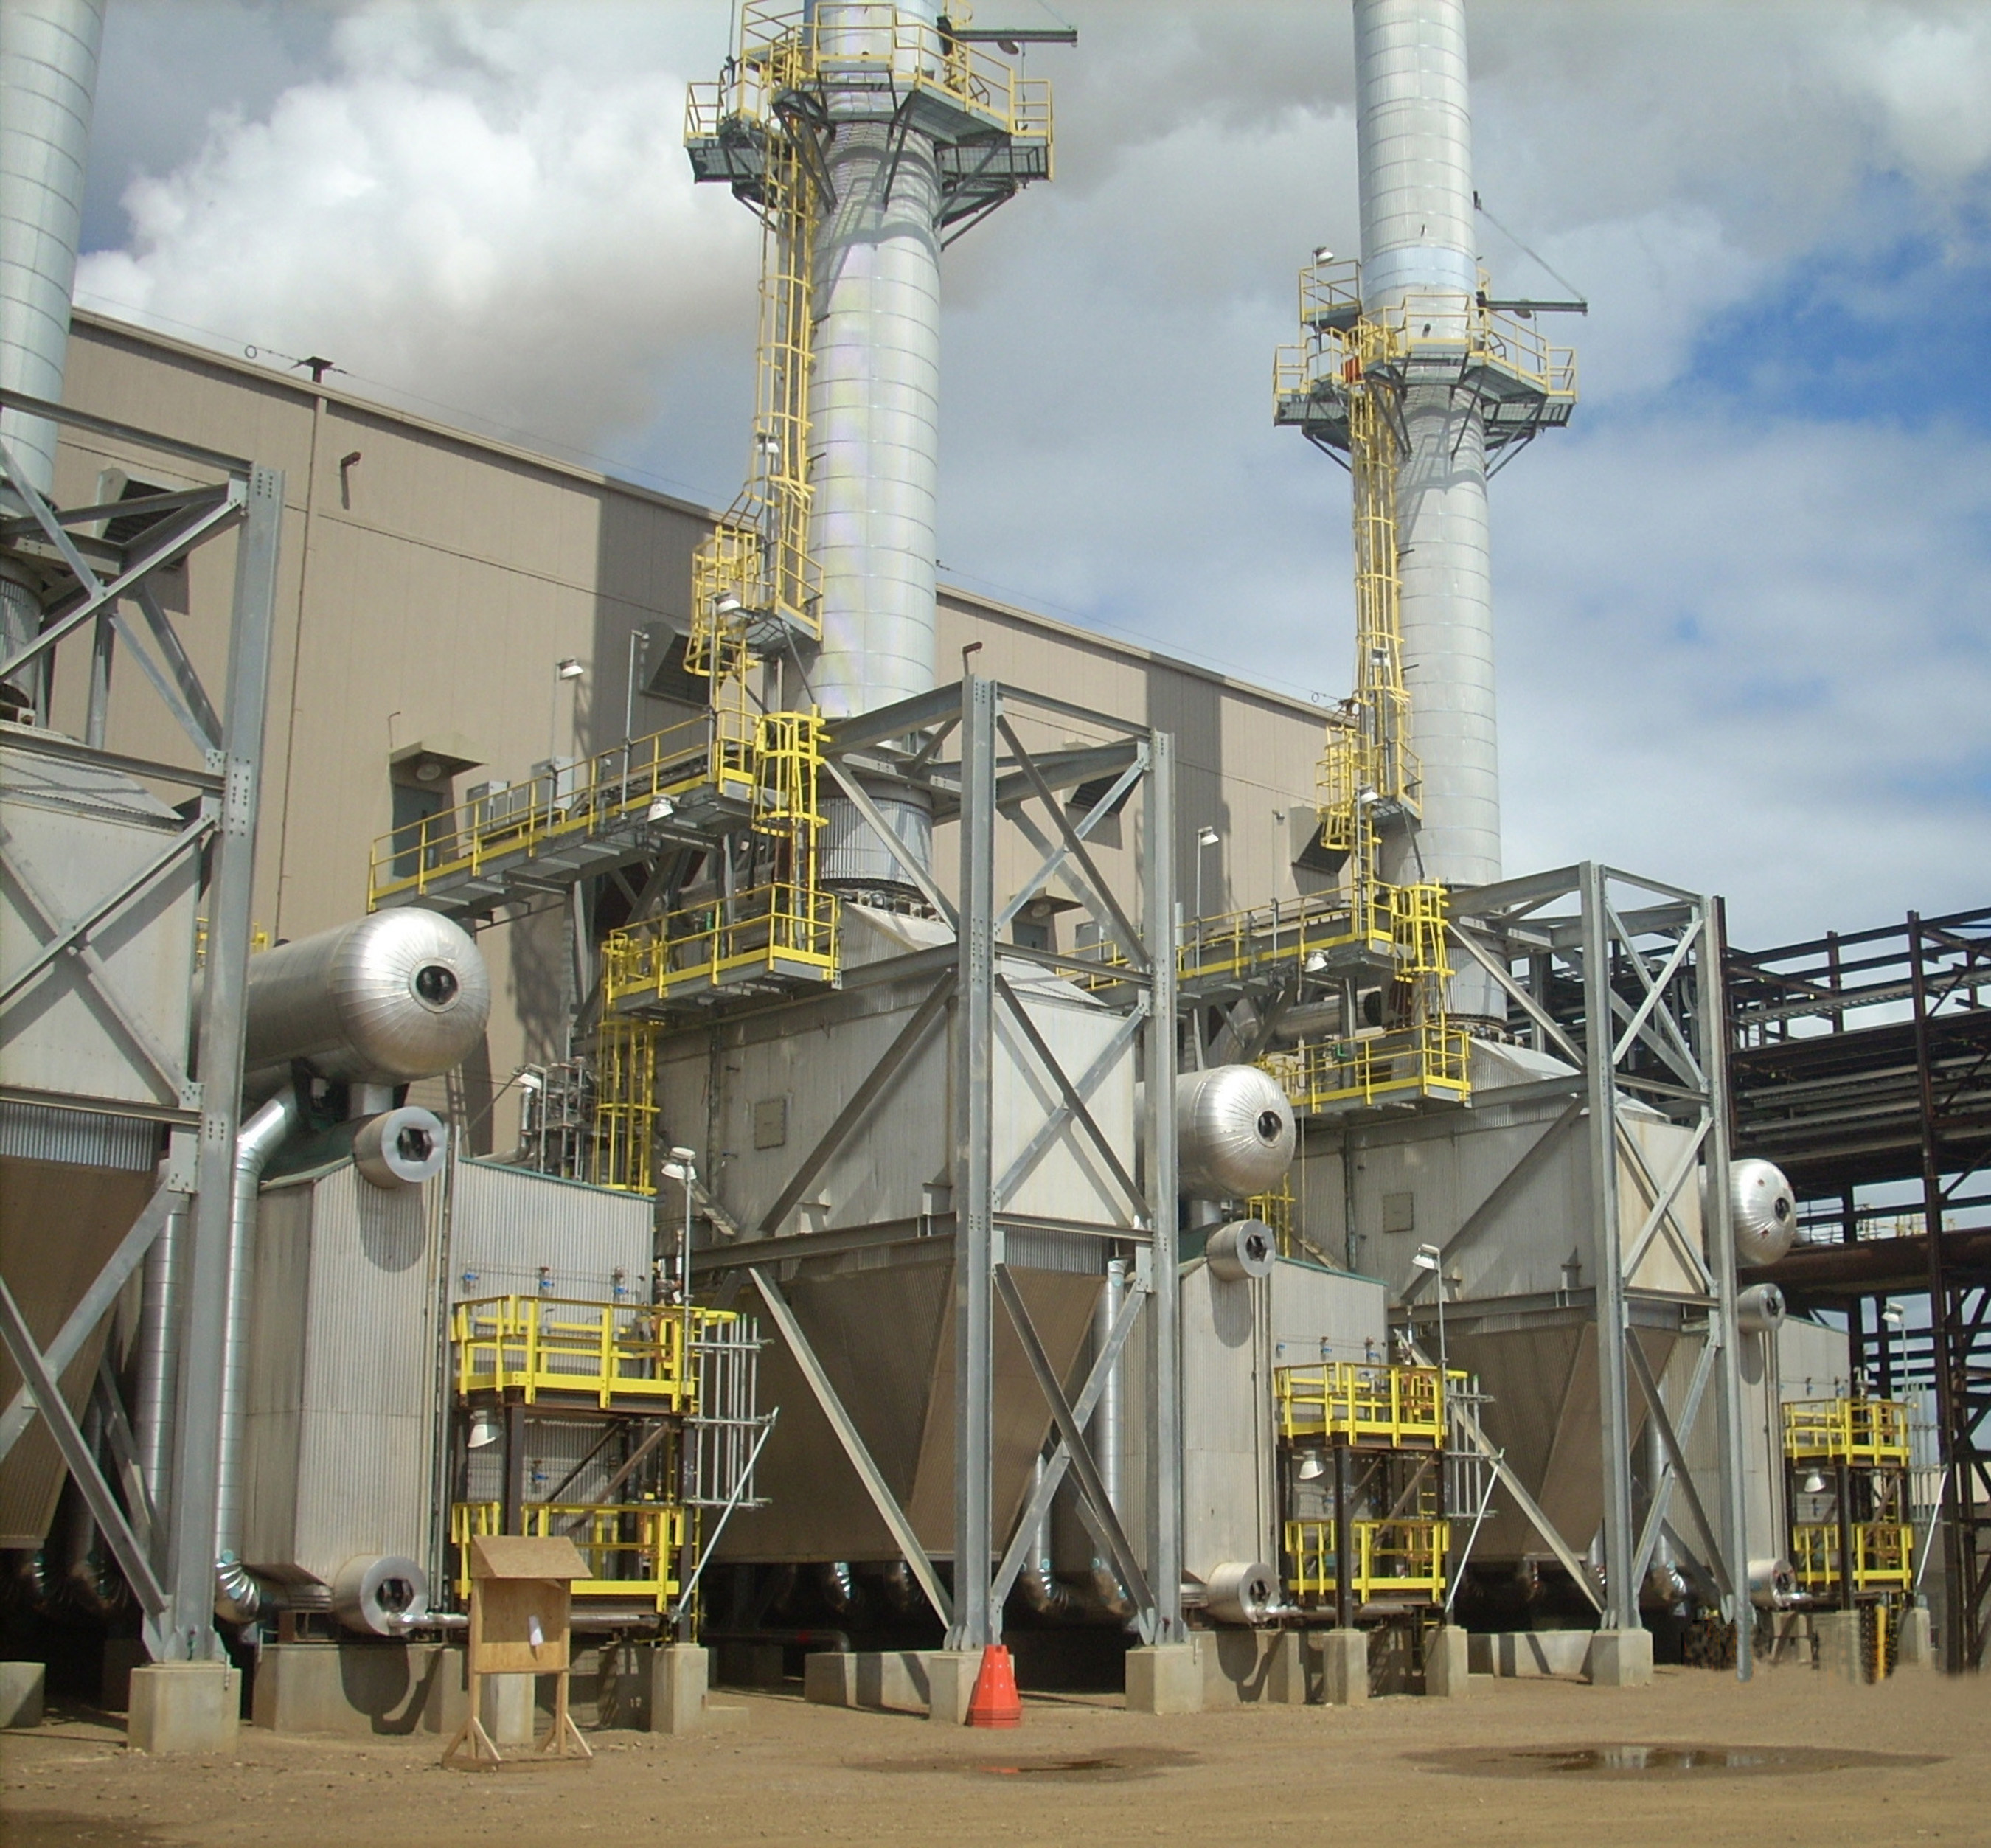 Elevated Drum D-Type Boilers. Wabash Power has boilers stocked in seven locations across the United States.